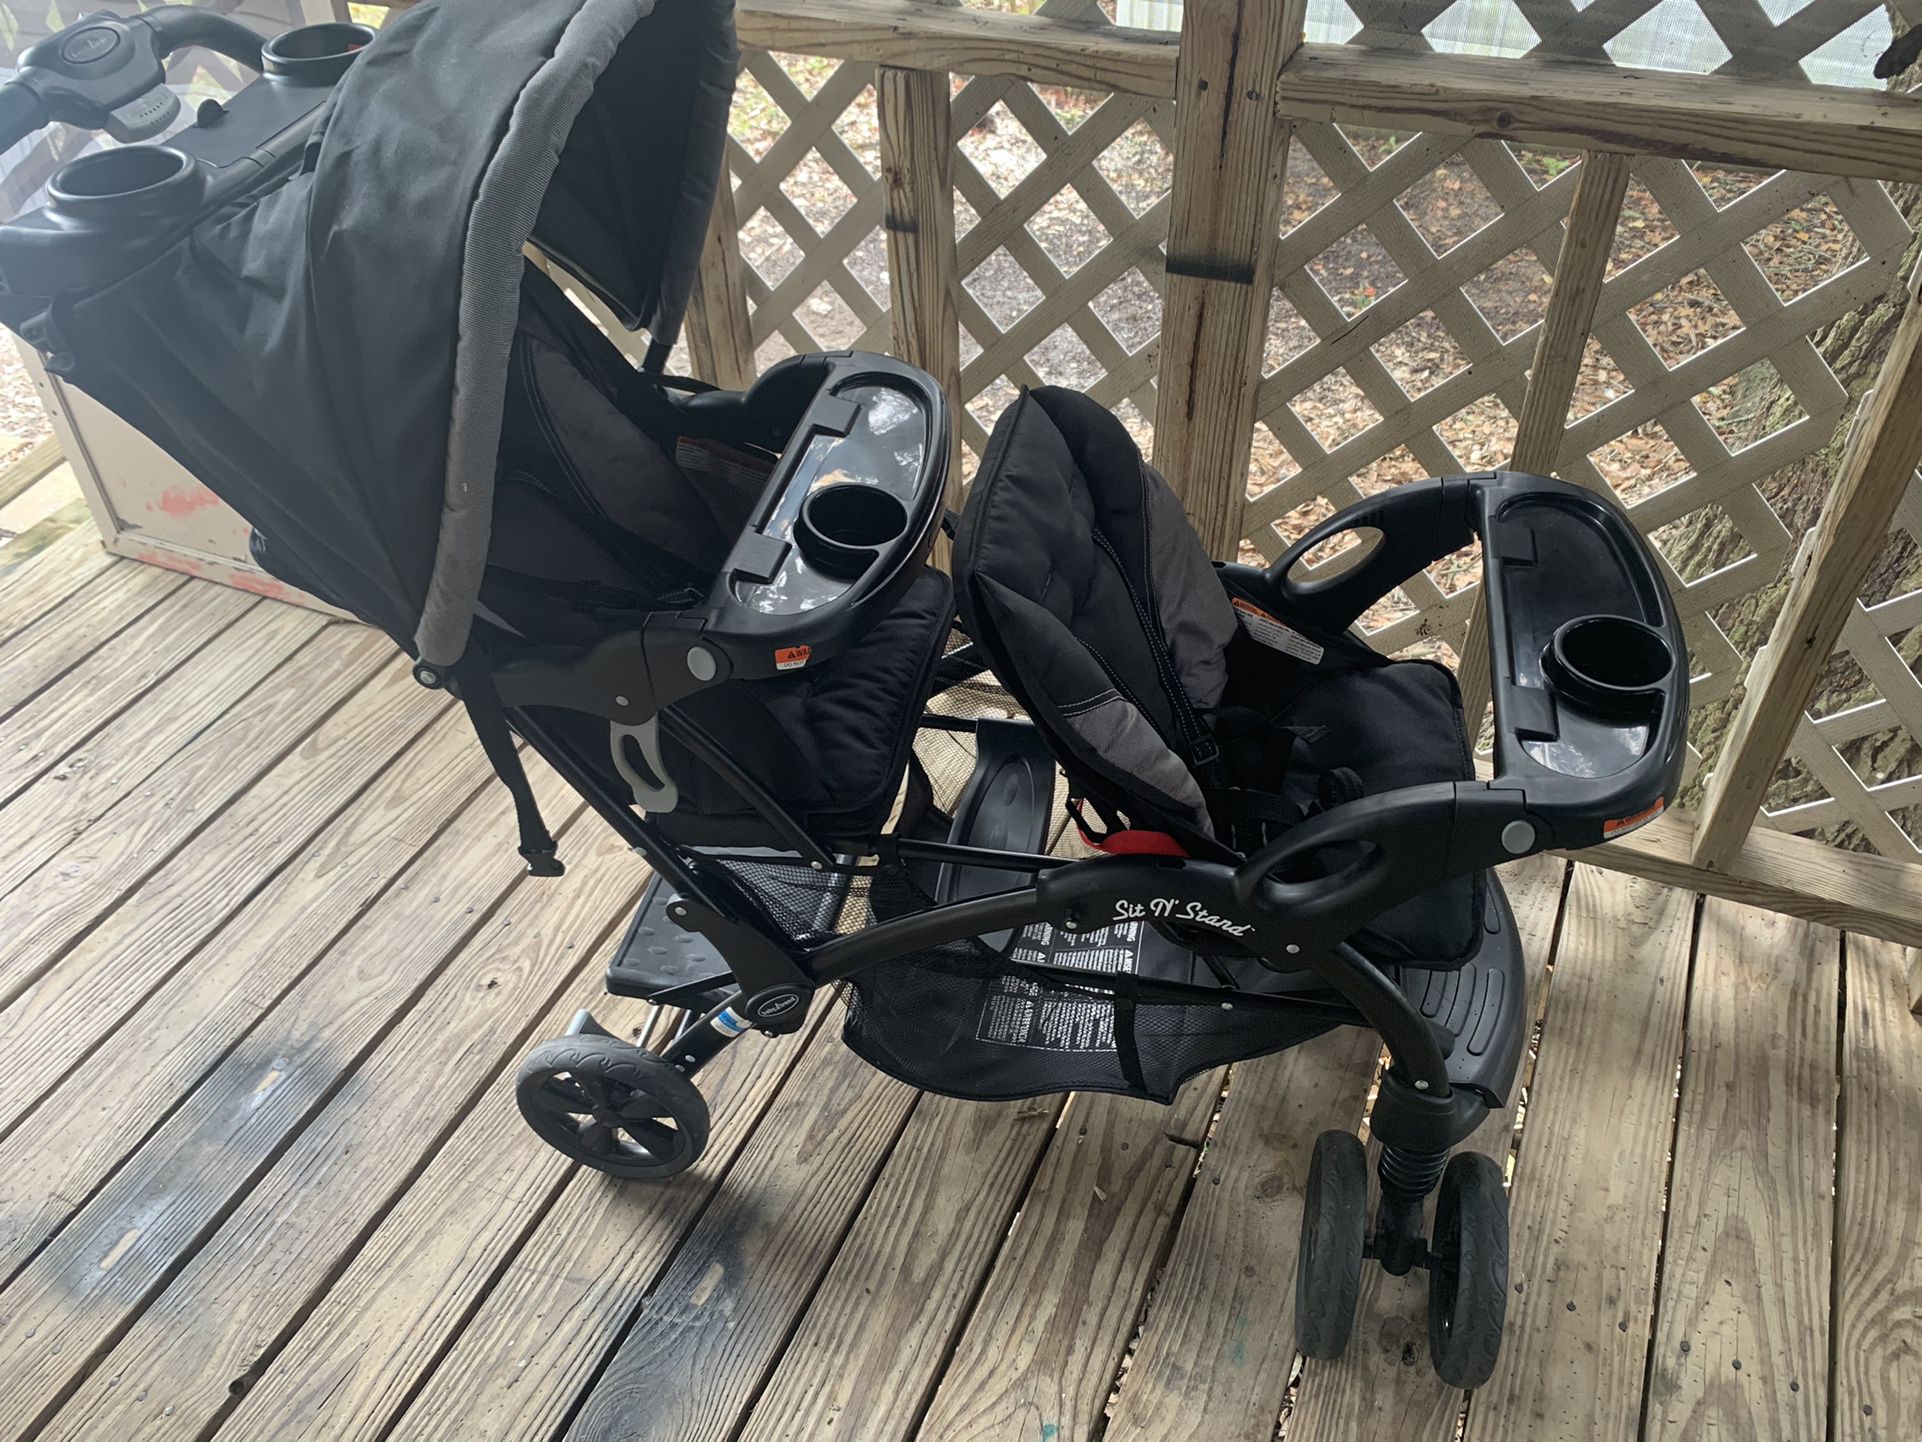 sit n’ stand double stroller